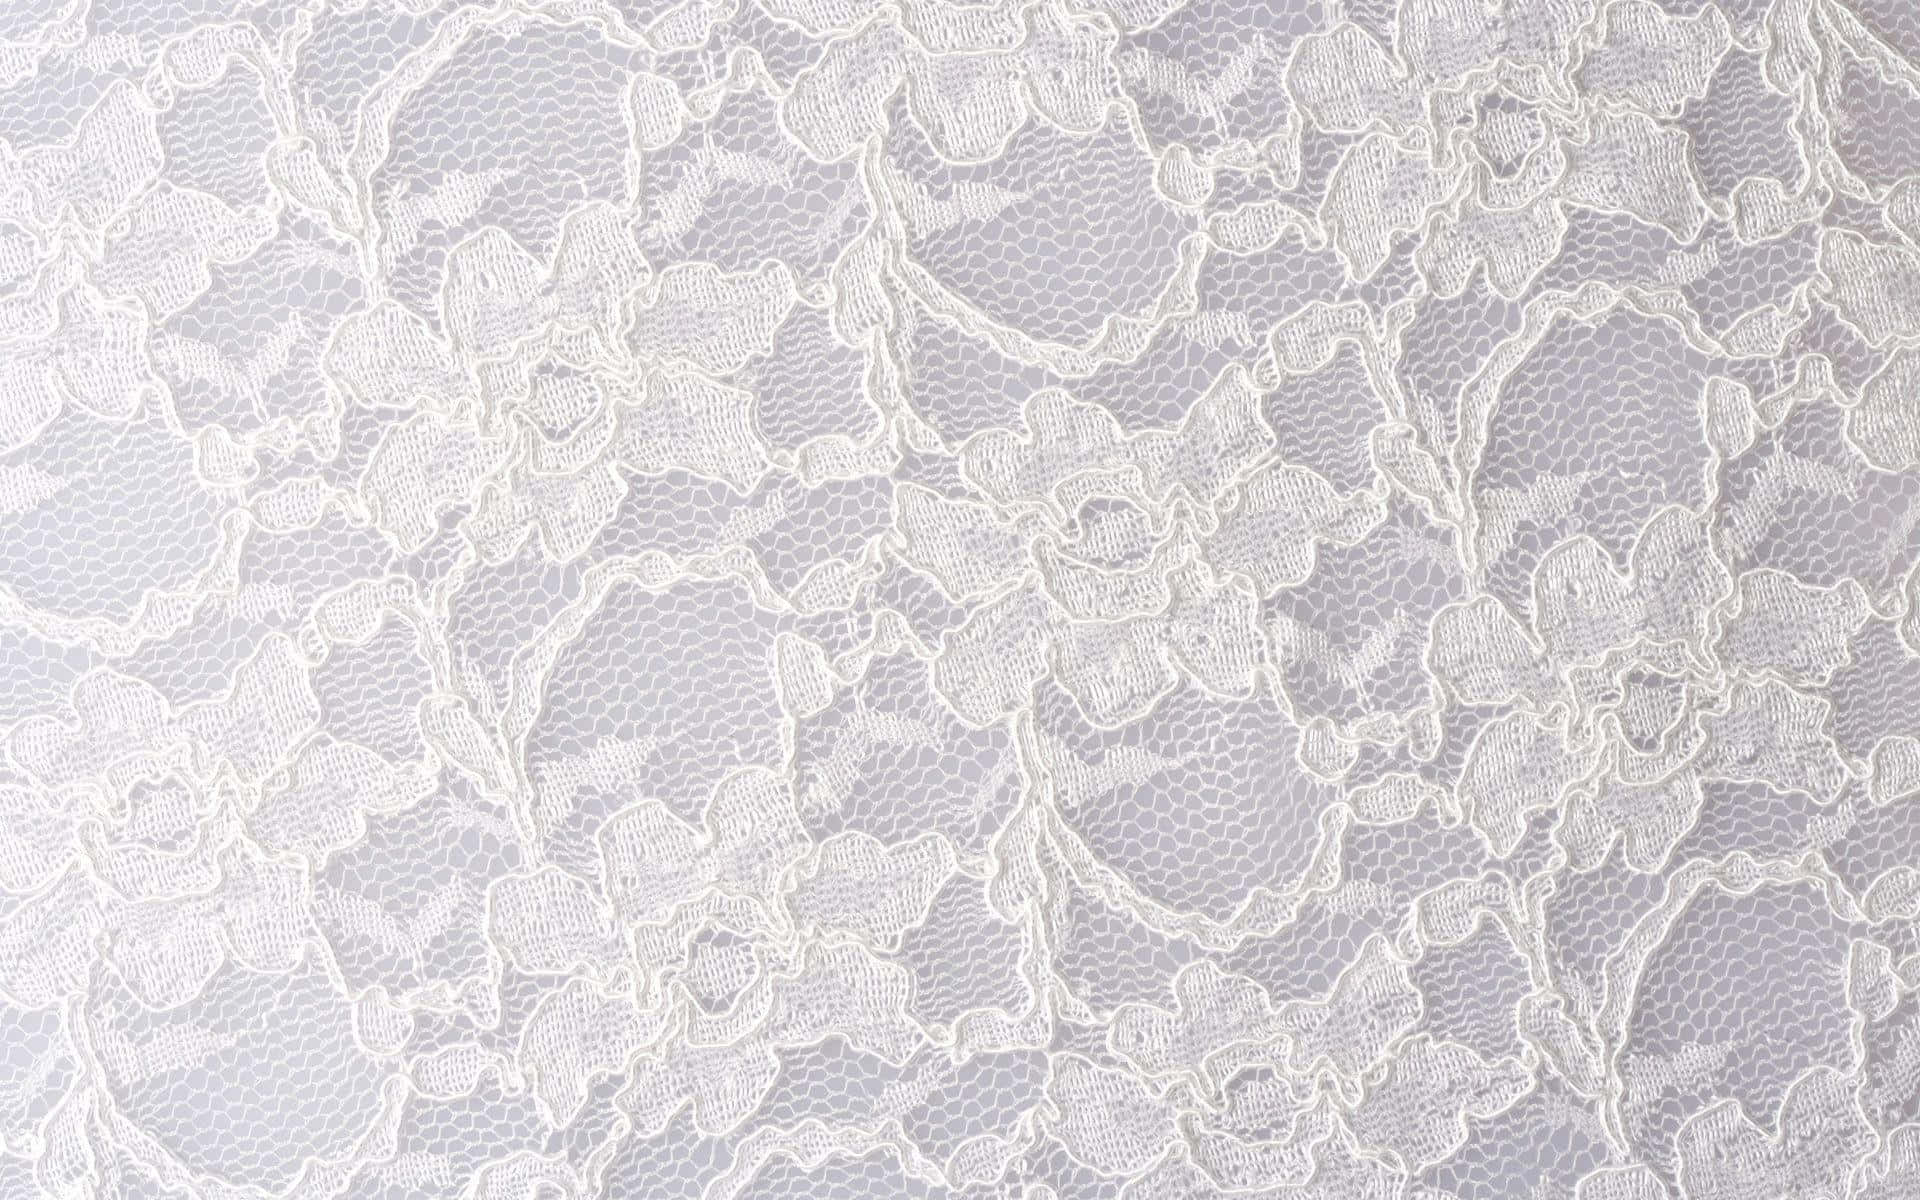 Invite Elegance Into Your Home With Artfully Crafted Lace